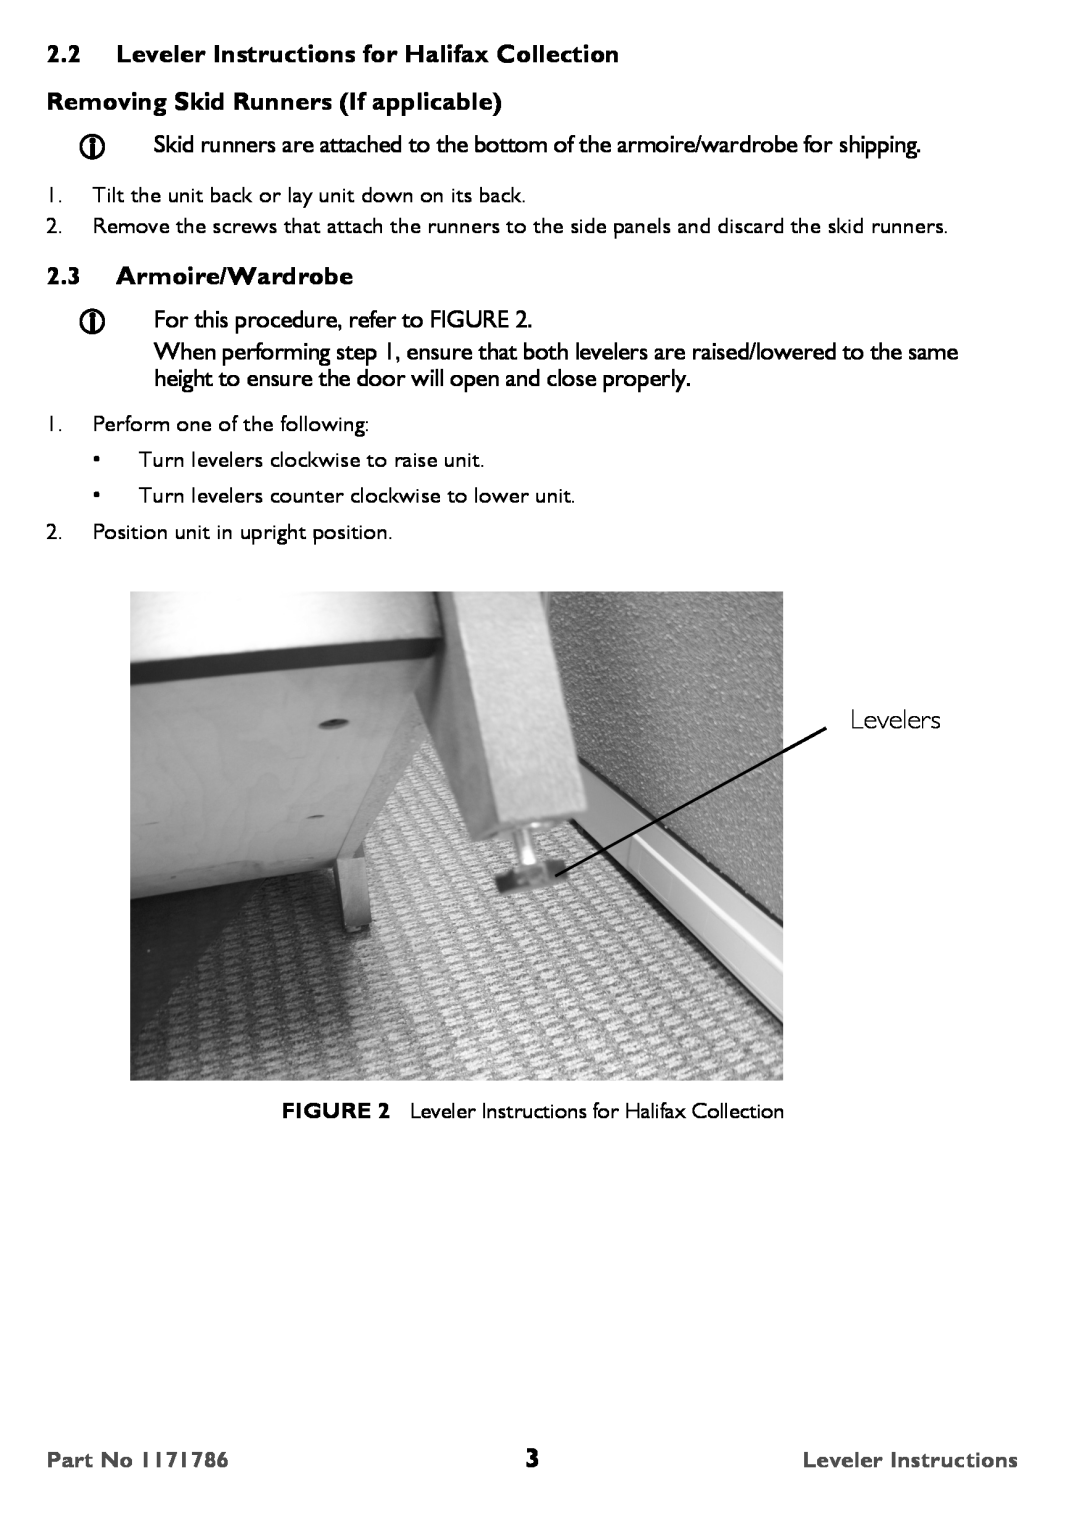 Invacare 1171786 user manual Levelers, 2.2Leveler Instructions for Halifax Collection, 2.3Armoire/Wardrobe 